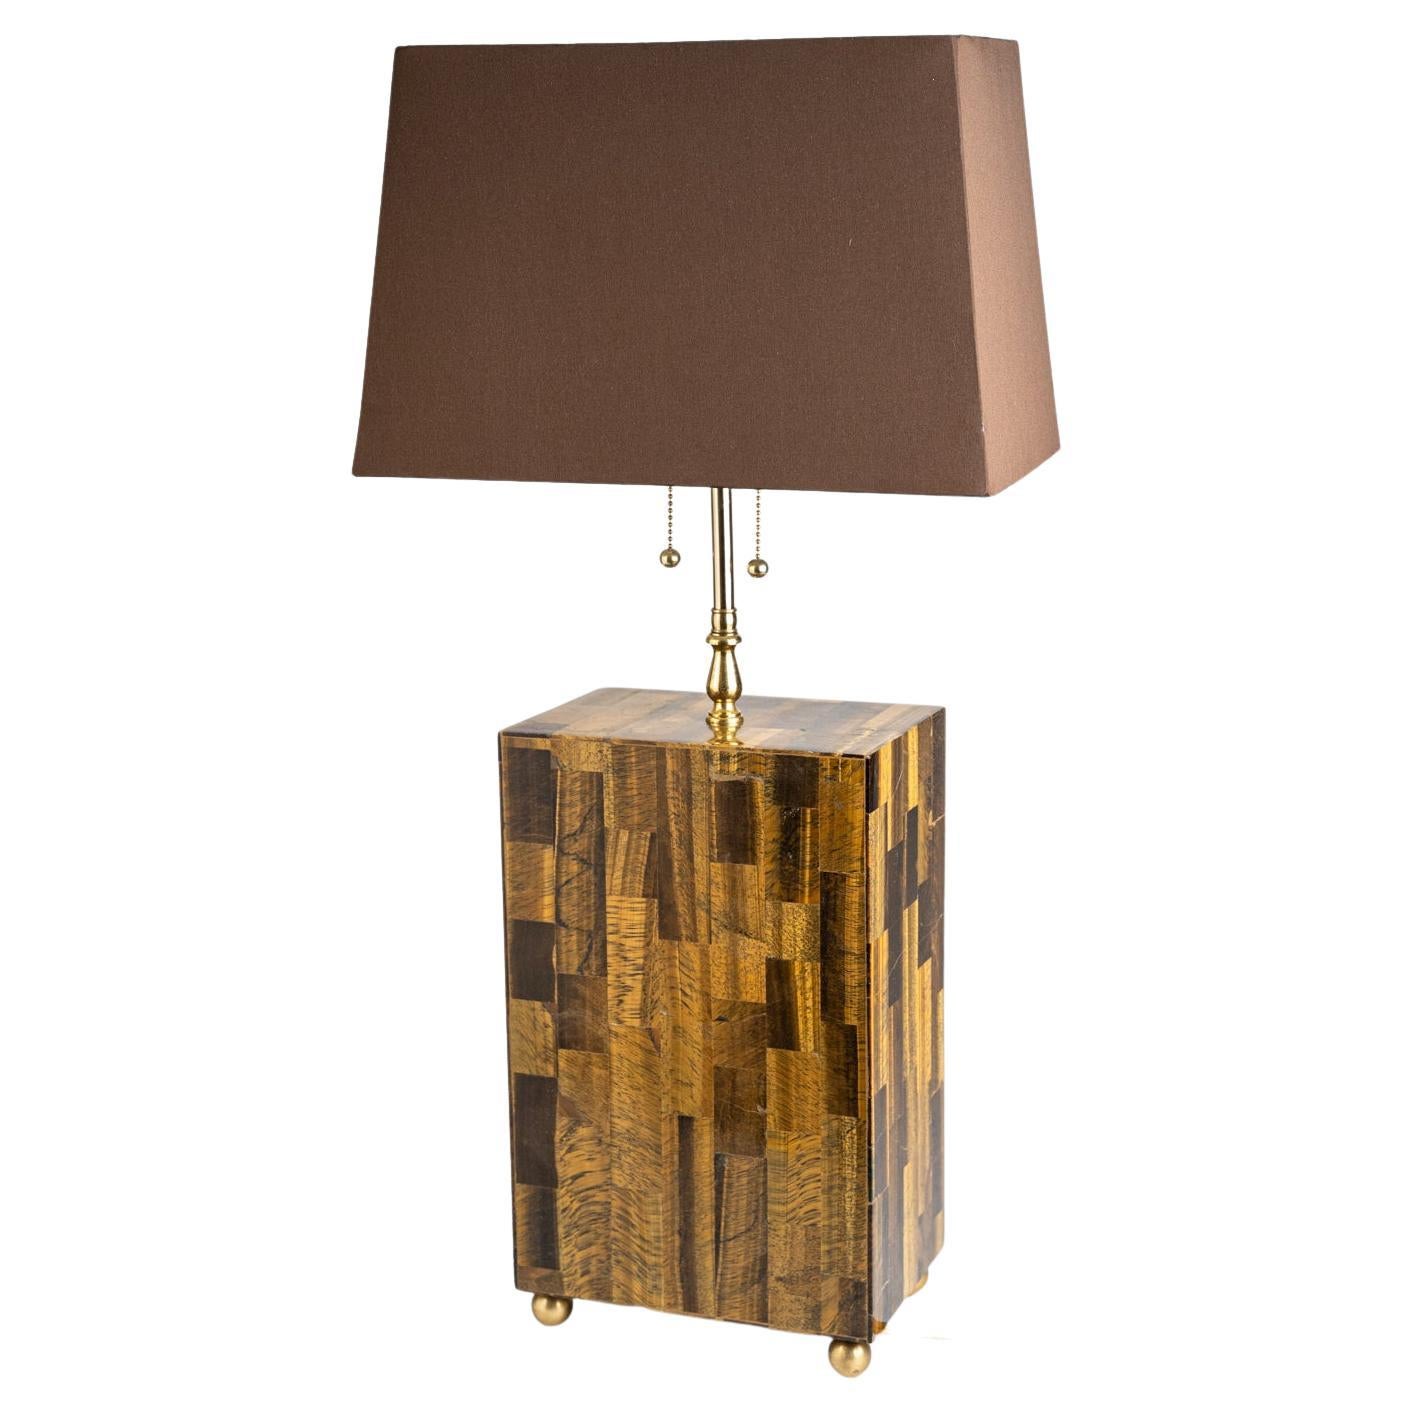 Mosaic Tiger's Eye Floor Lamp from India